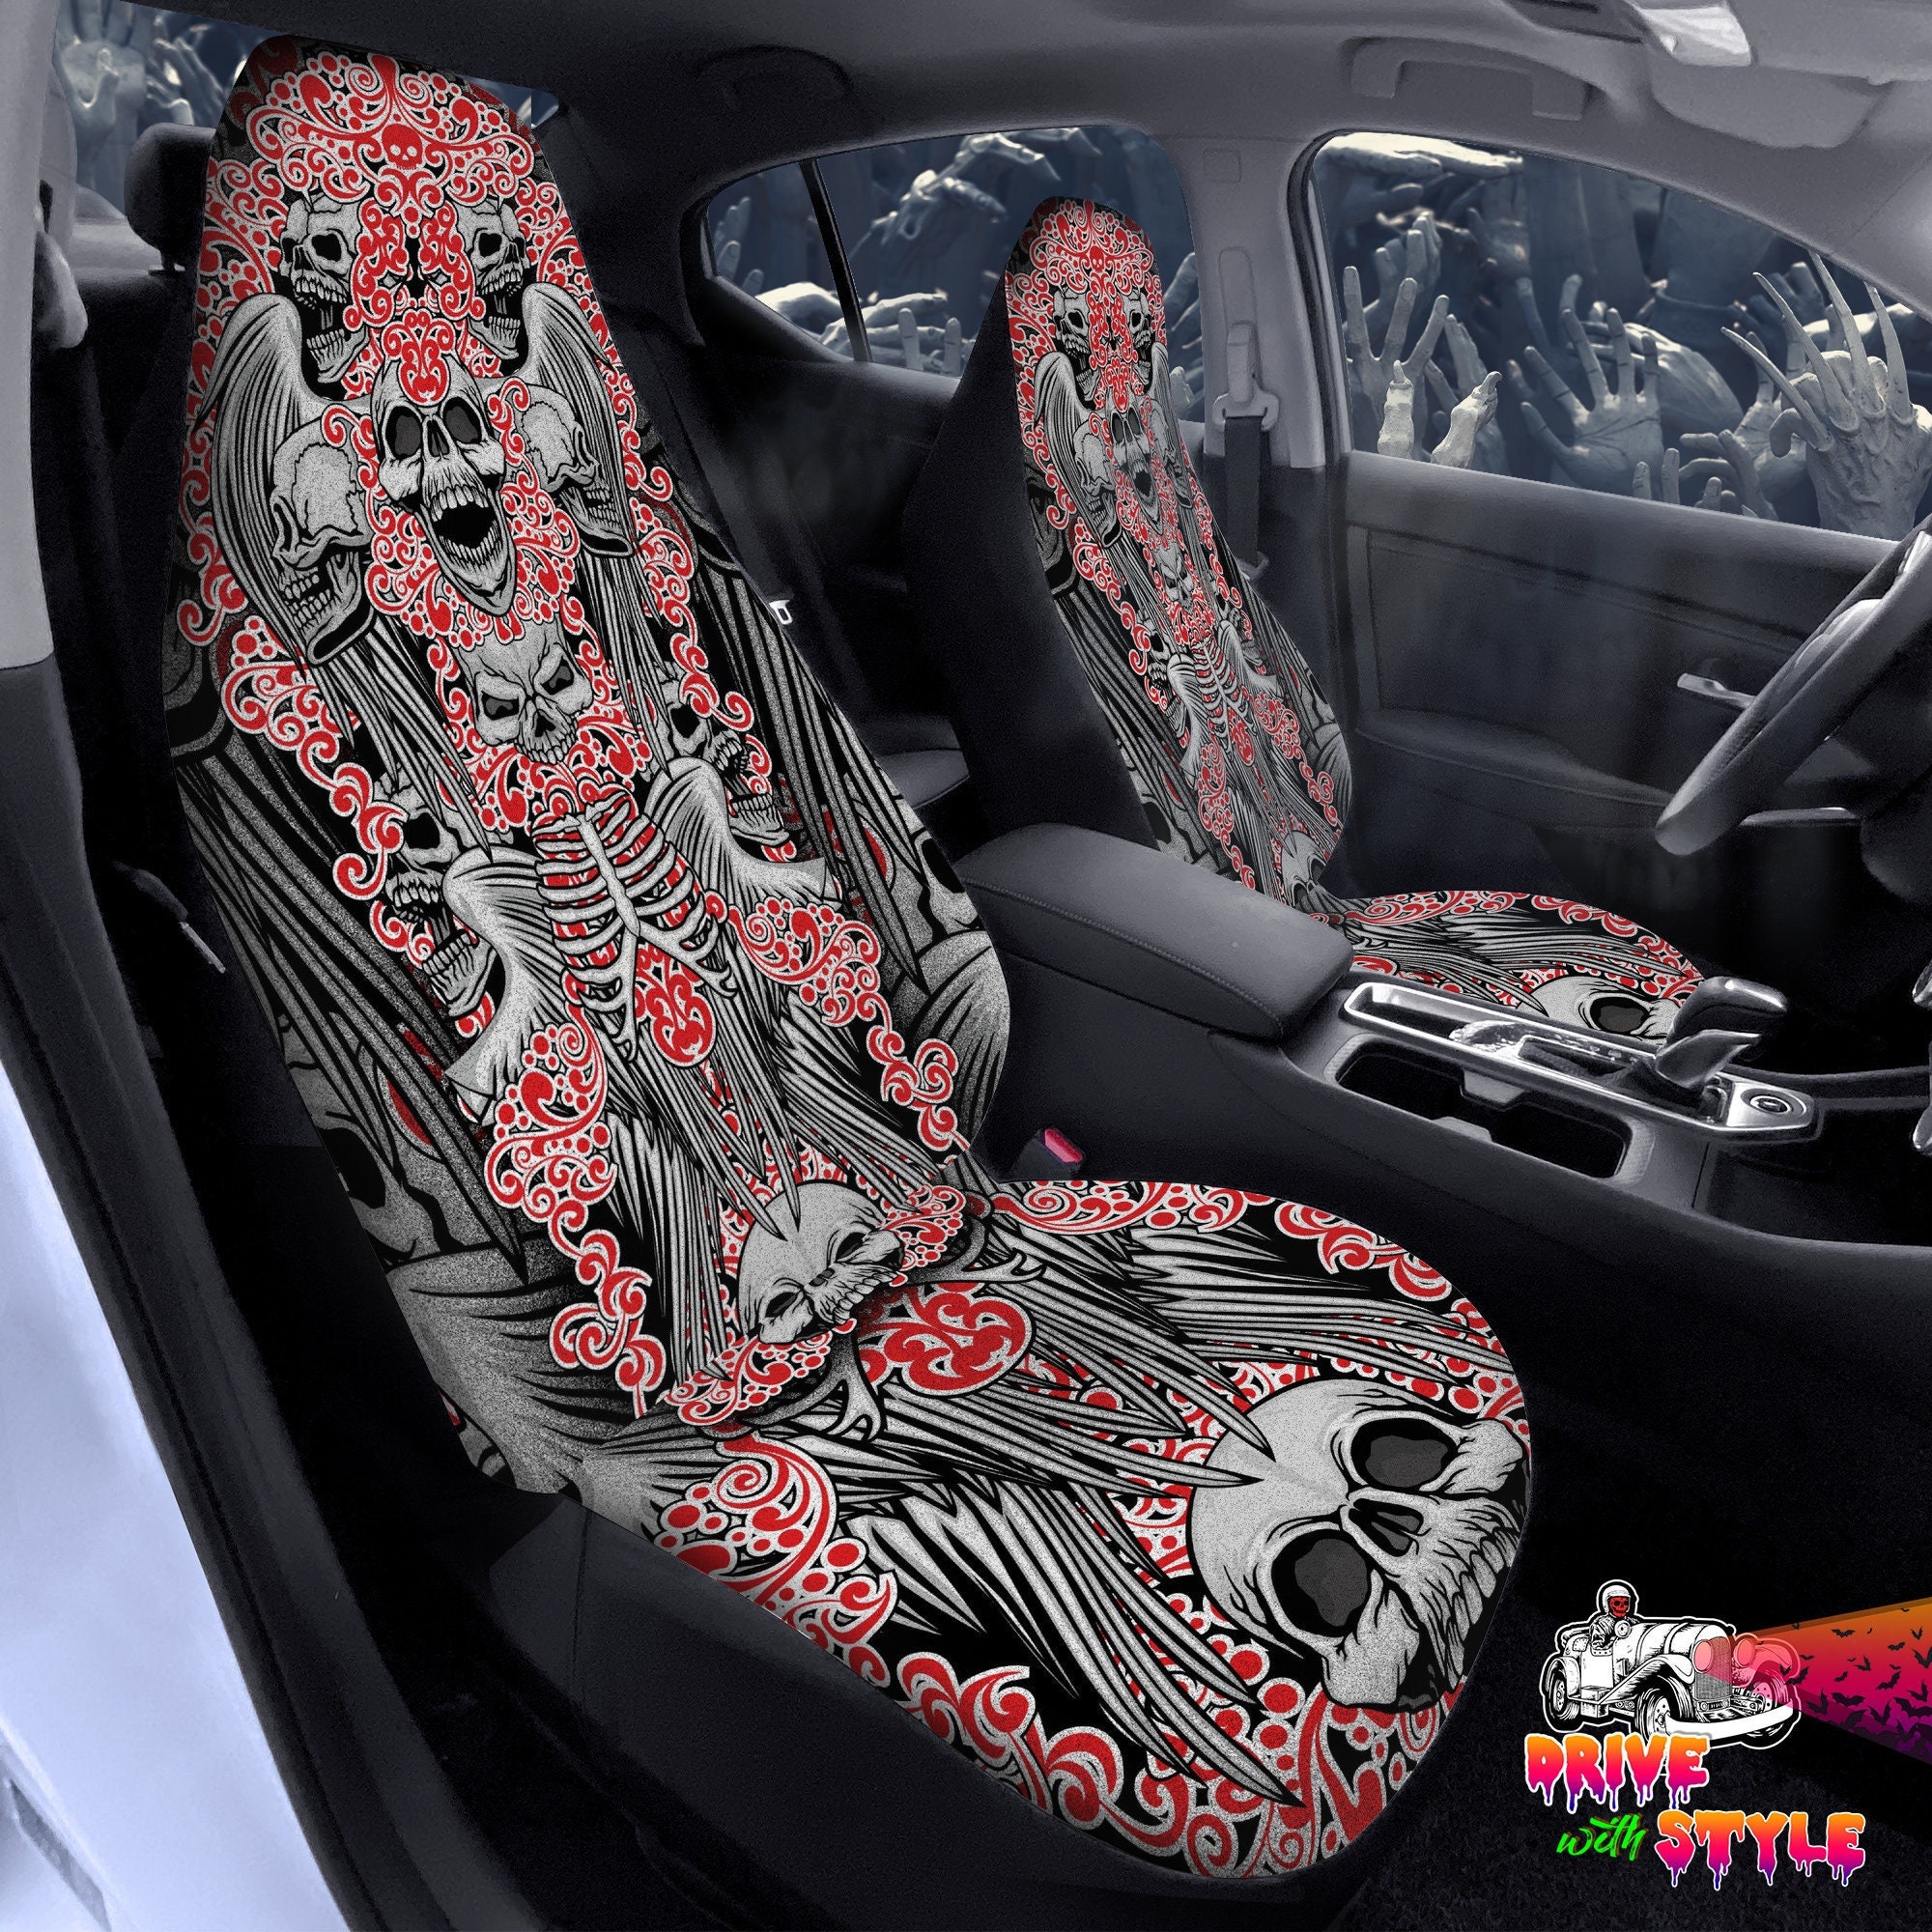 Retro Car Seat Covers, Goth Car Decor Aesthetic Gift for Him,skull Car  Decorations,gothic Car Accessories for Men,tattoo Car Lover Gift 